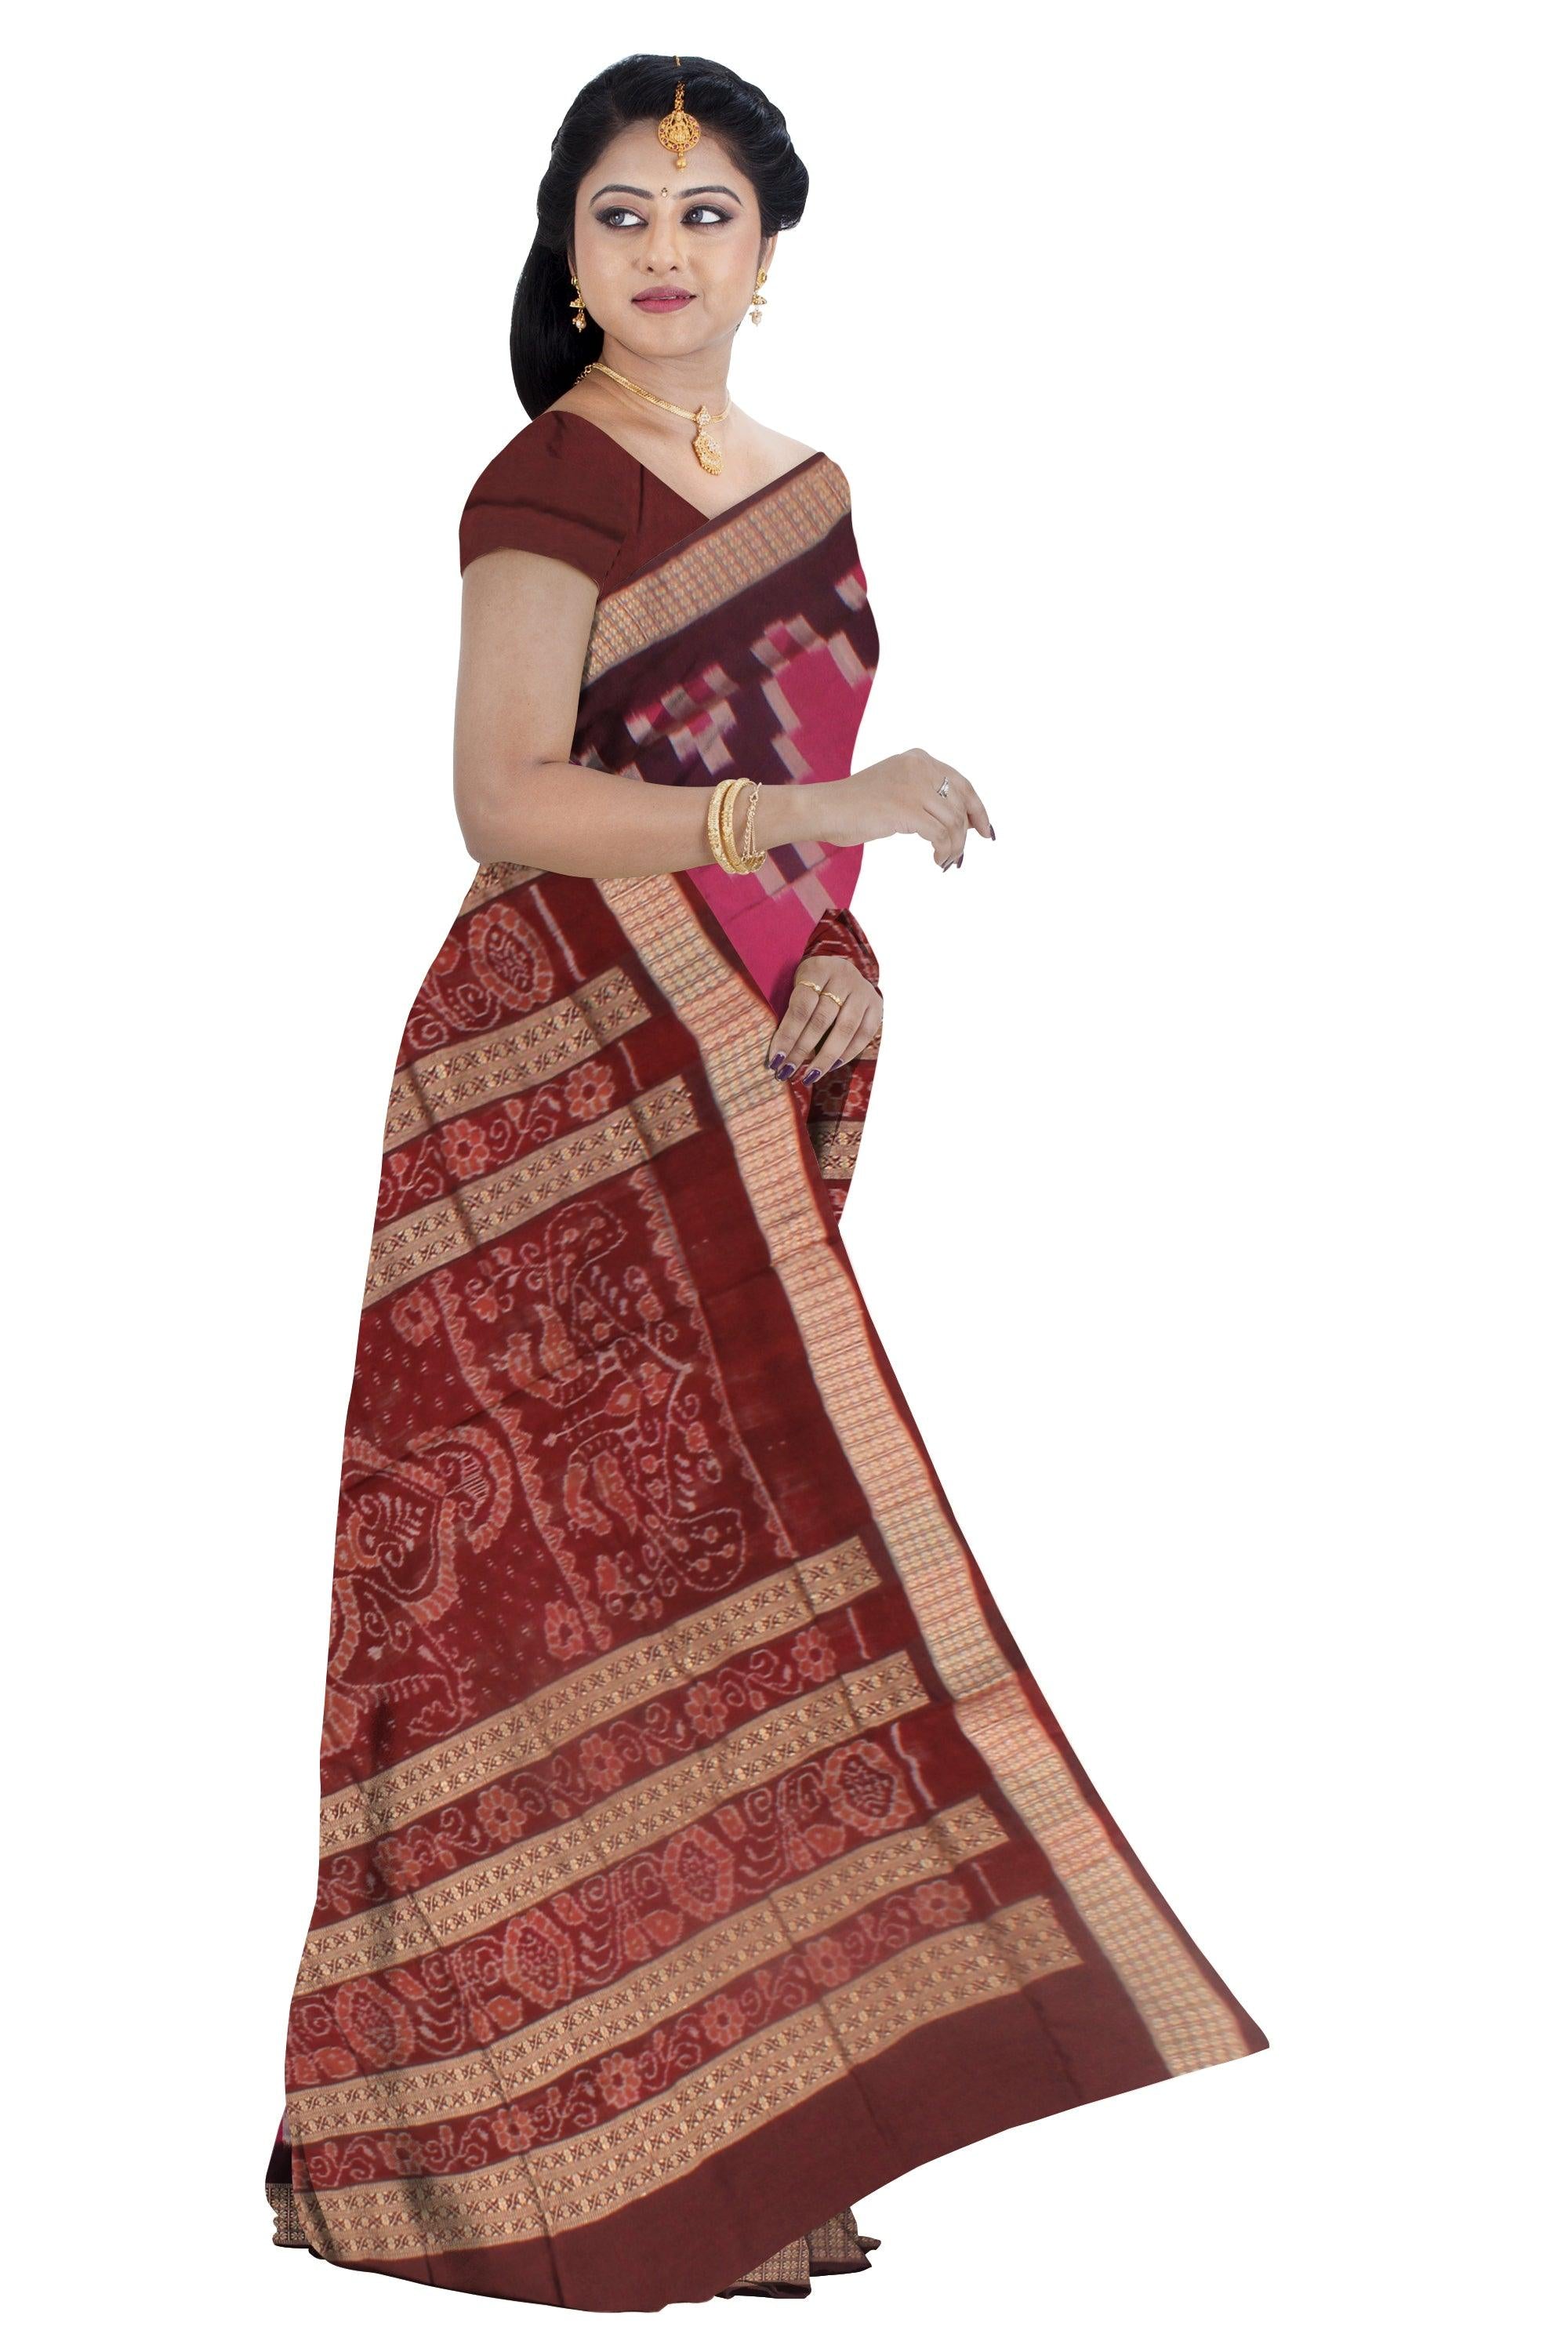 SONEPUR PATA SAREE WITH PASAPALI DESIGN IN PINK AND COFFEE WITH BLOUSE PIECE. - Koshali Arts & Crafts Enterprise